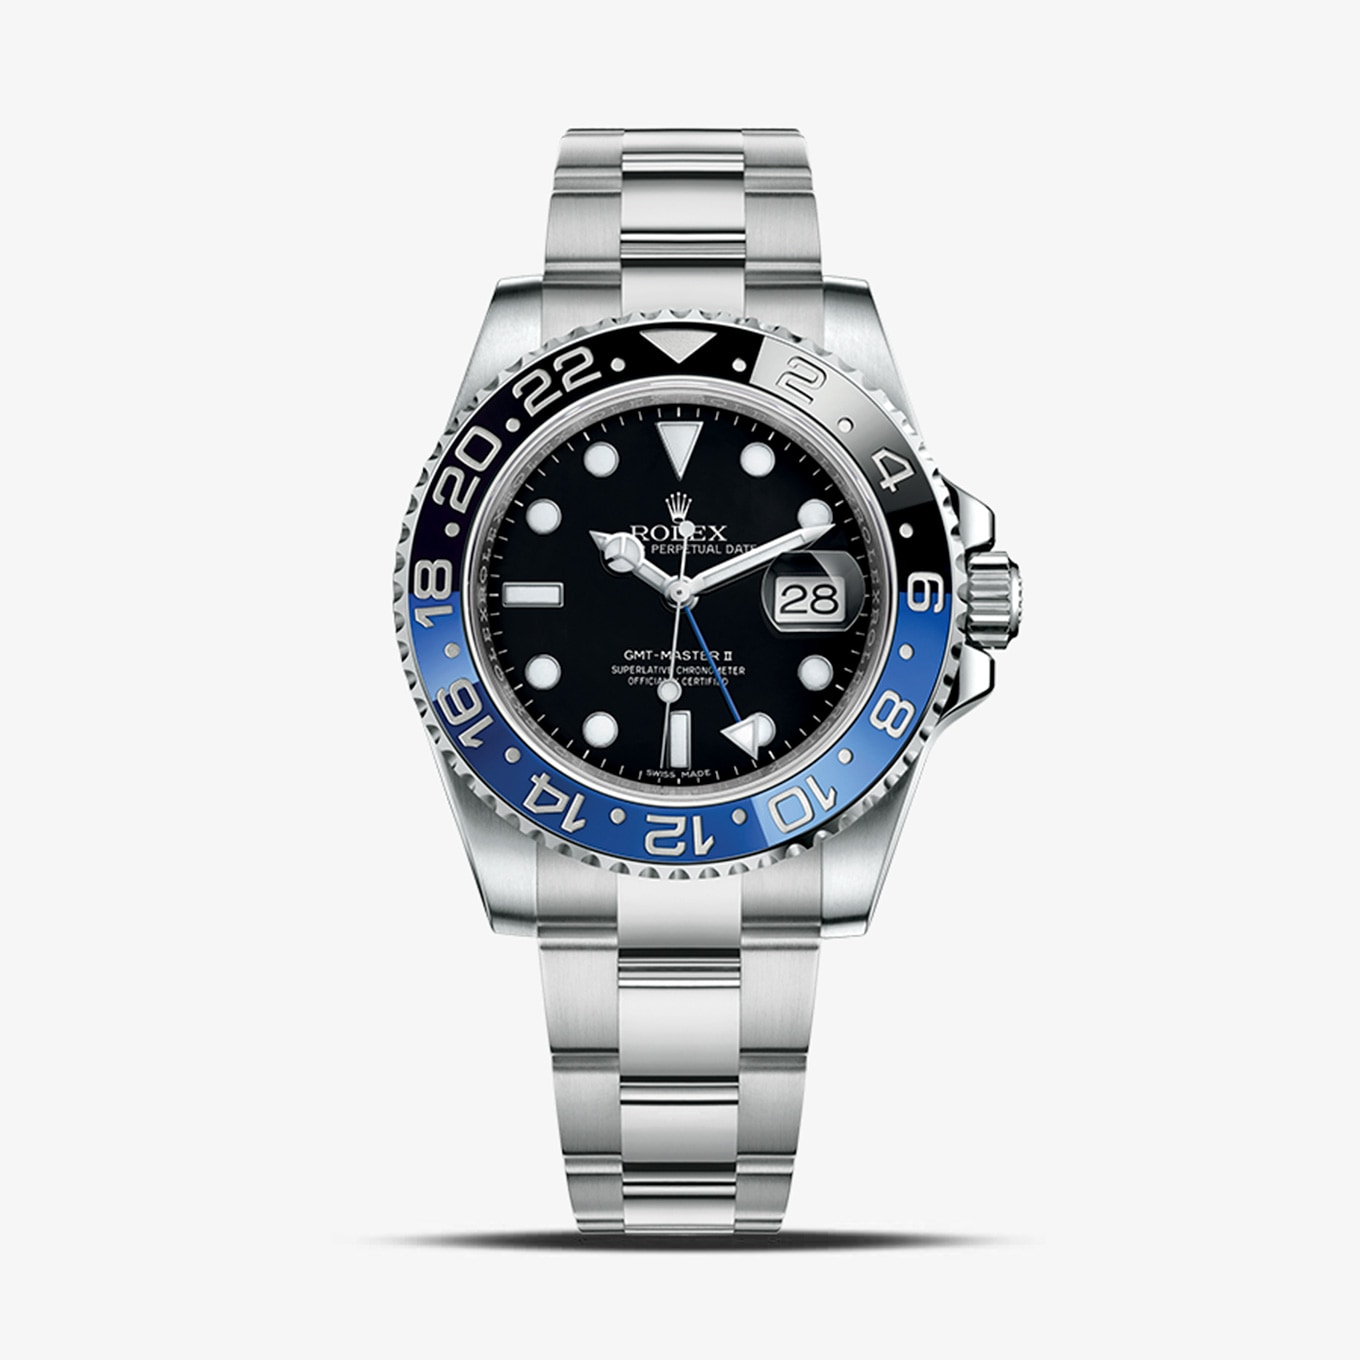 rolex oyster perpetual date gmt master